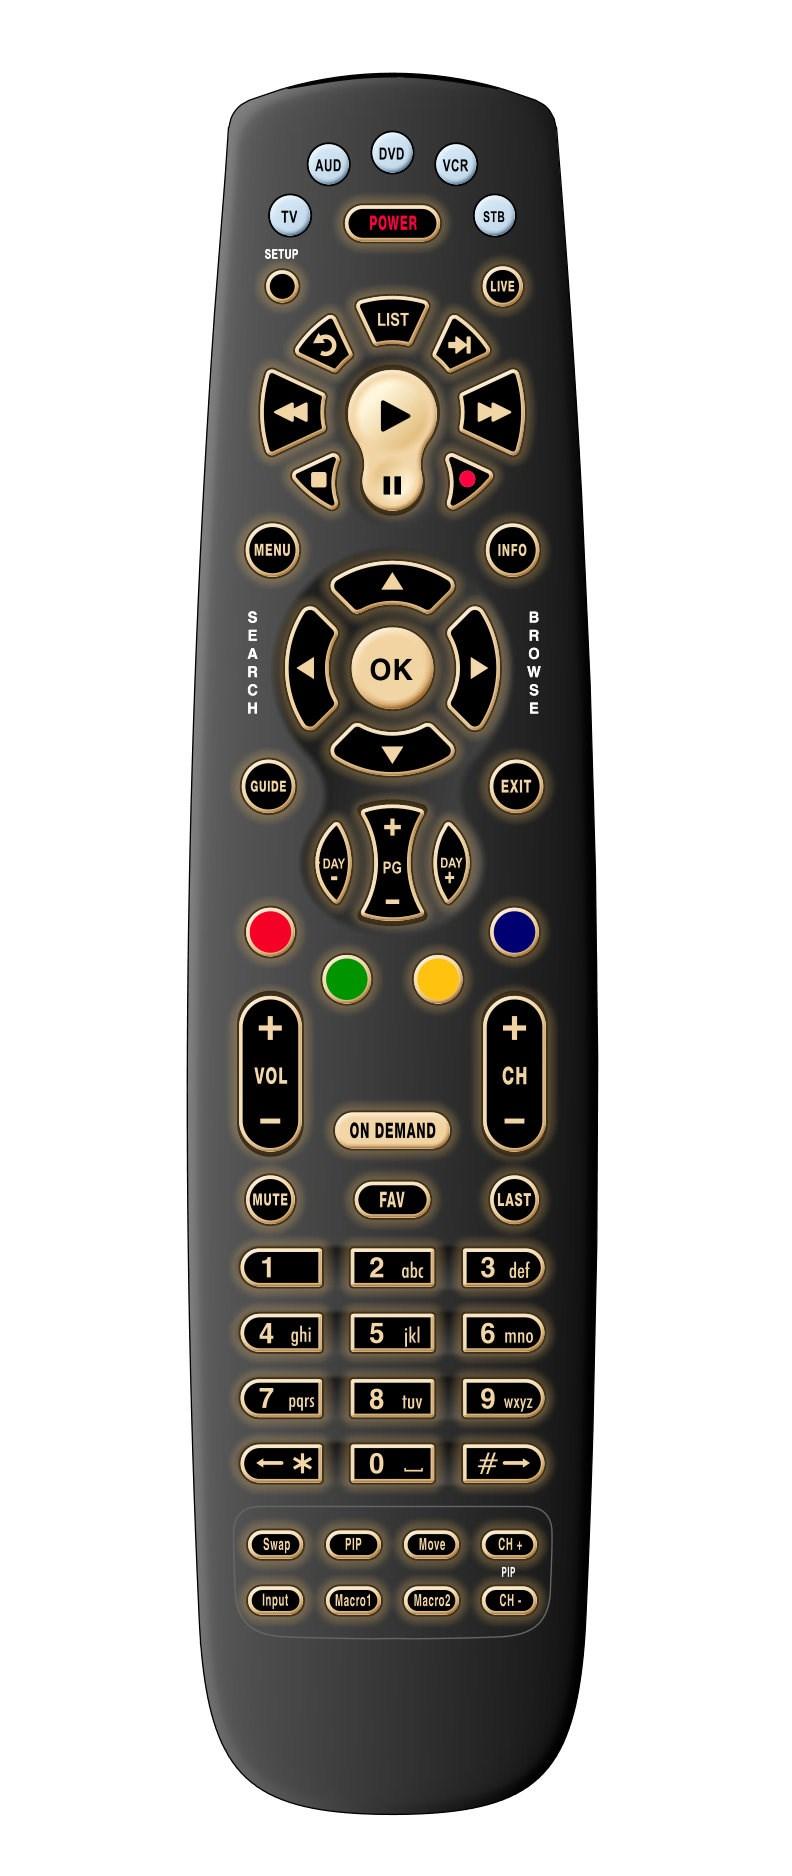 Setup Use to program the remote. Skip Fwd, Skip Back, Rew, Play, FFwd, Stop, Pause or Record In STB mode, these control the DVR functions. Menu Displays interactive menu.